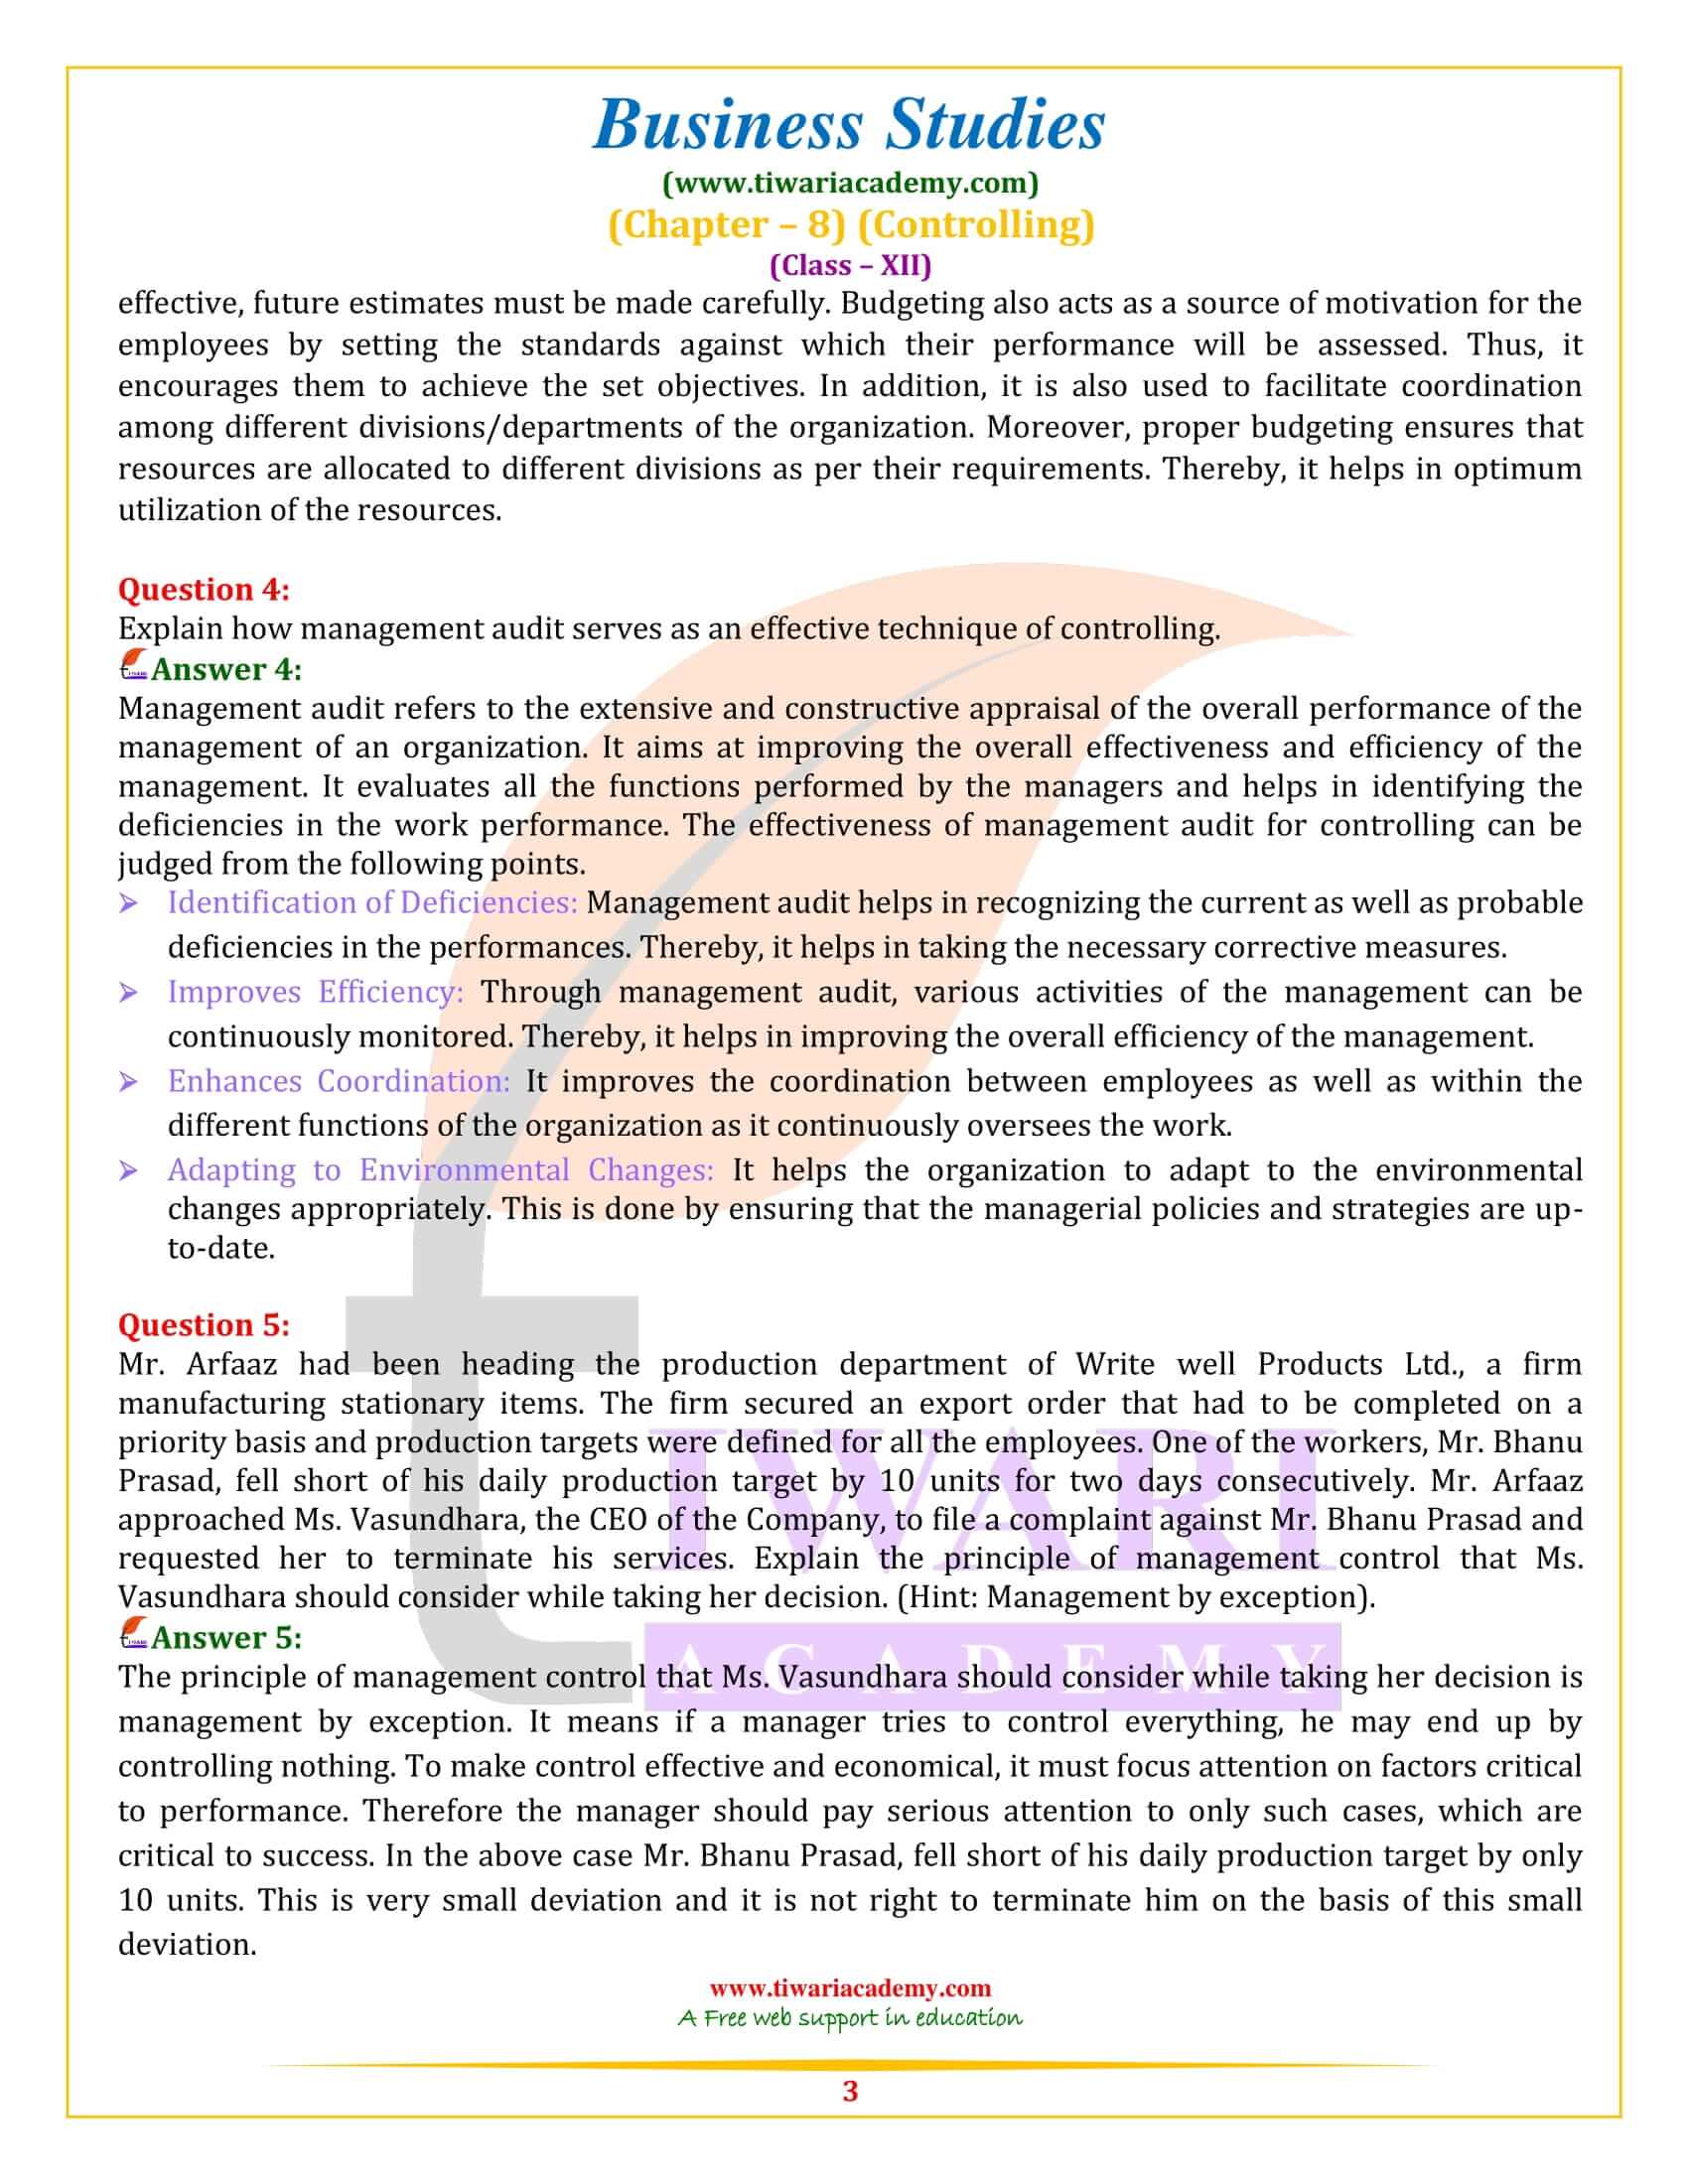 NCERT Solutions for Class 12 Business Studies Chapter 8 in English Medium